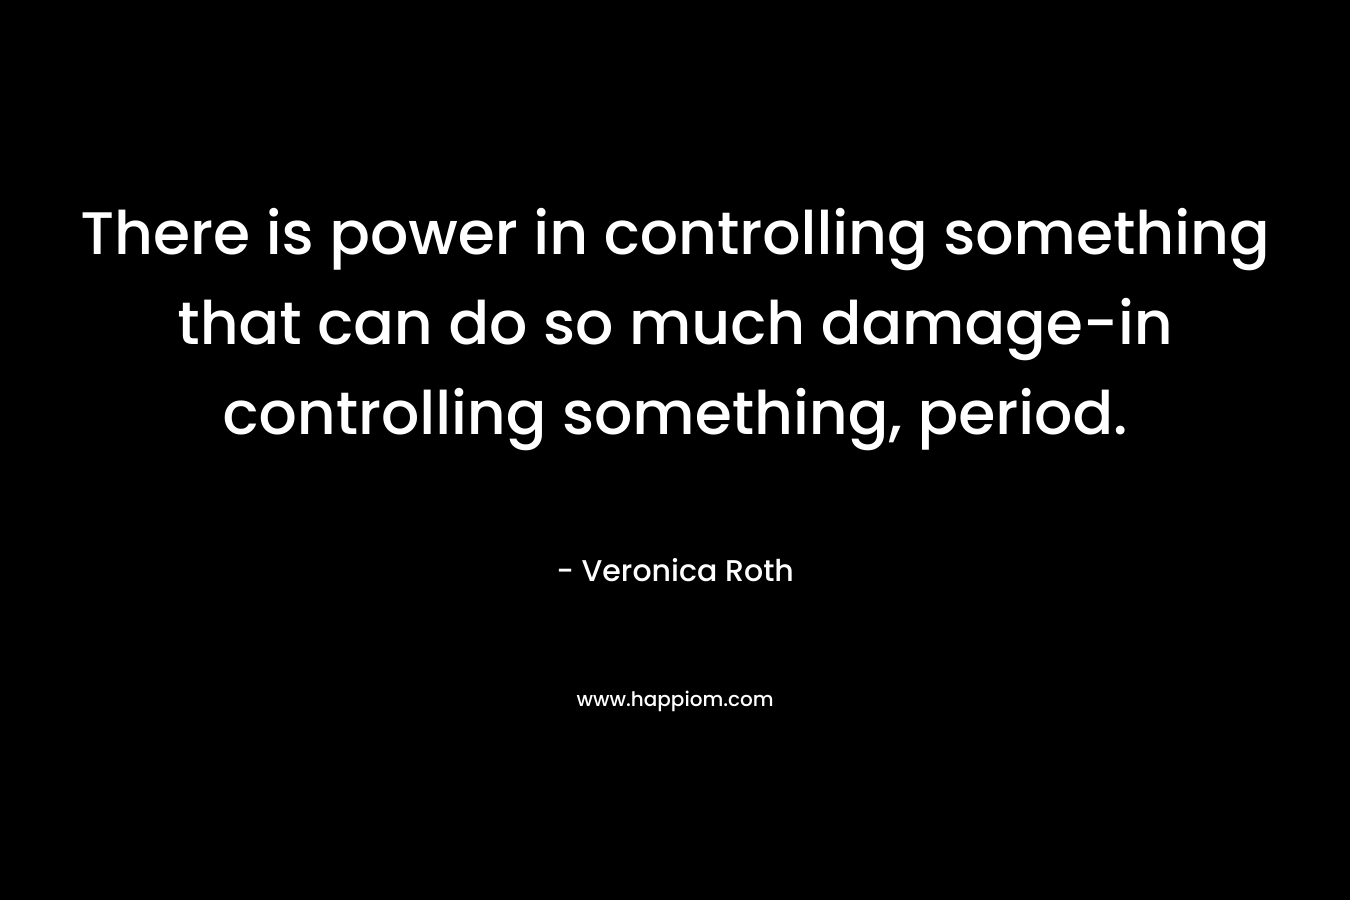 There is power in controlling something that can do so much damage-in controlling something, period.